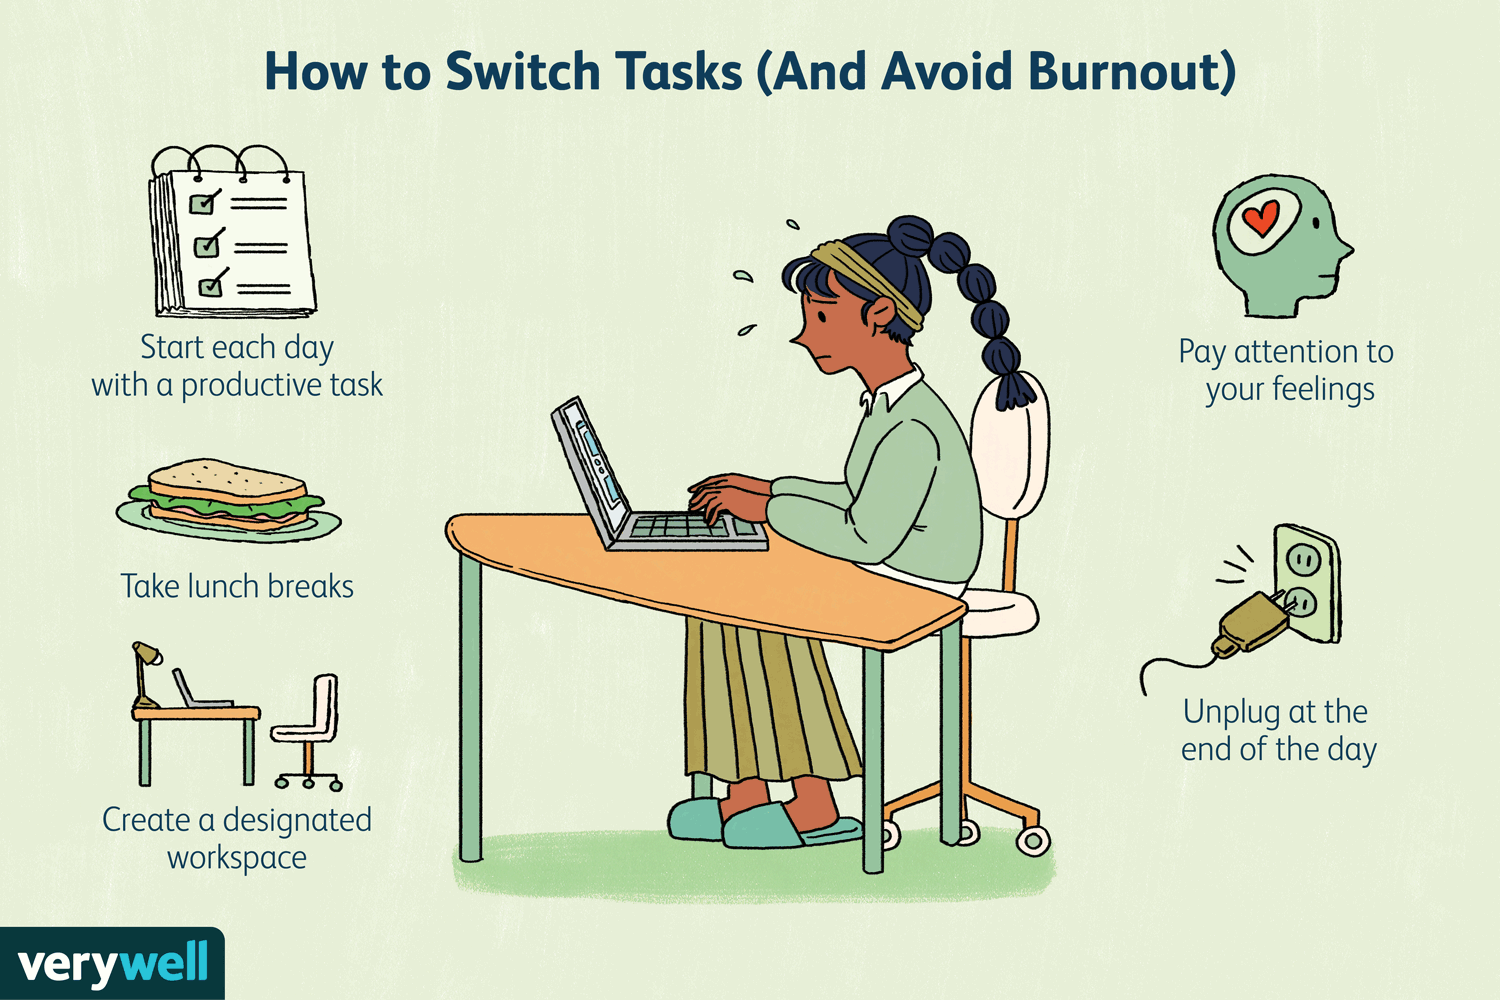 the-best-way-to-switch-tasks-to-avoid-burnout-5095637-final-withtext-e3744cfbabff490c9be99be1202017fd